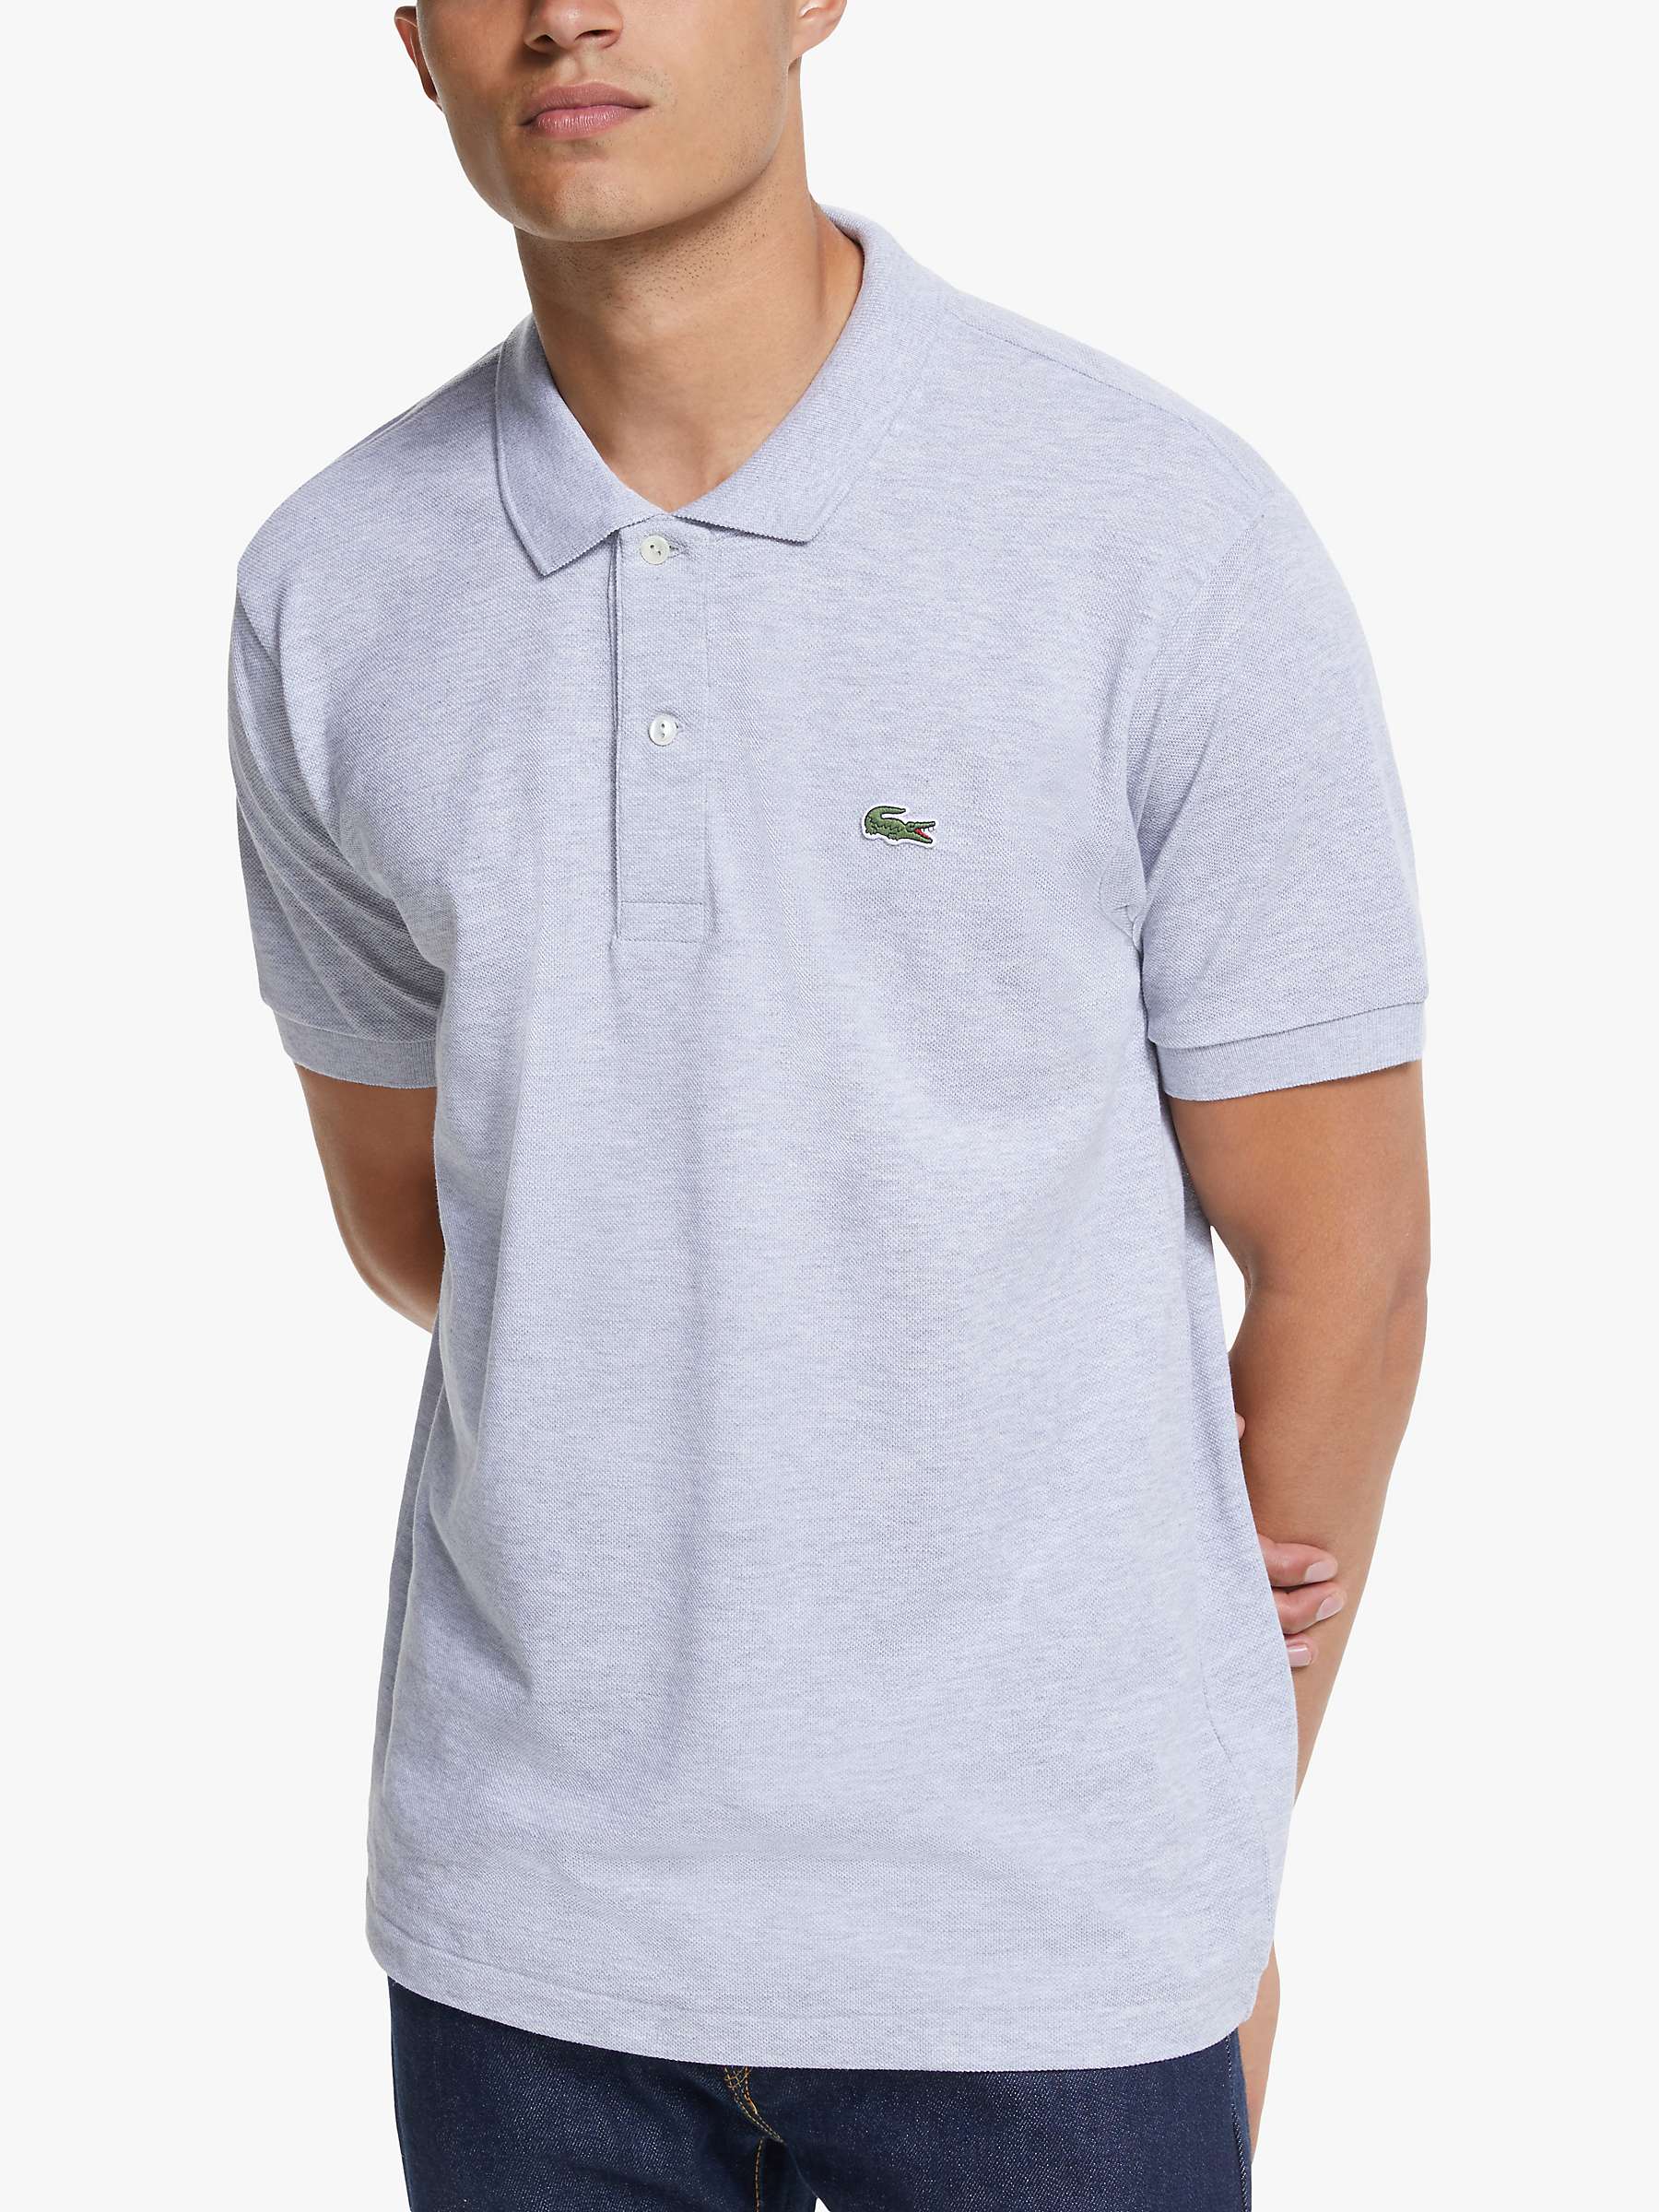 Lacoste Classic Fit Shirt, Silver at John Lewis & Partners